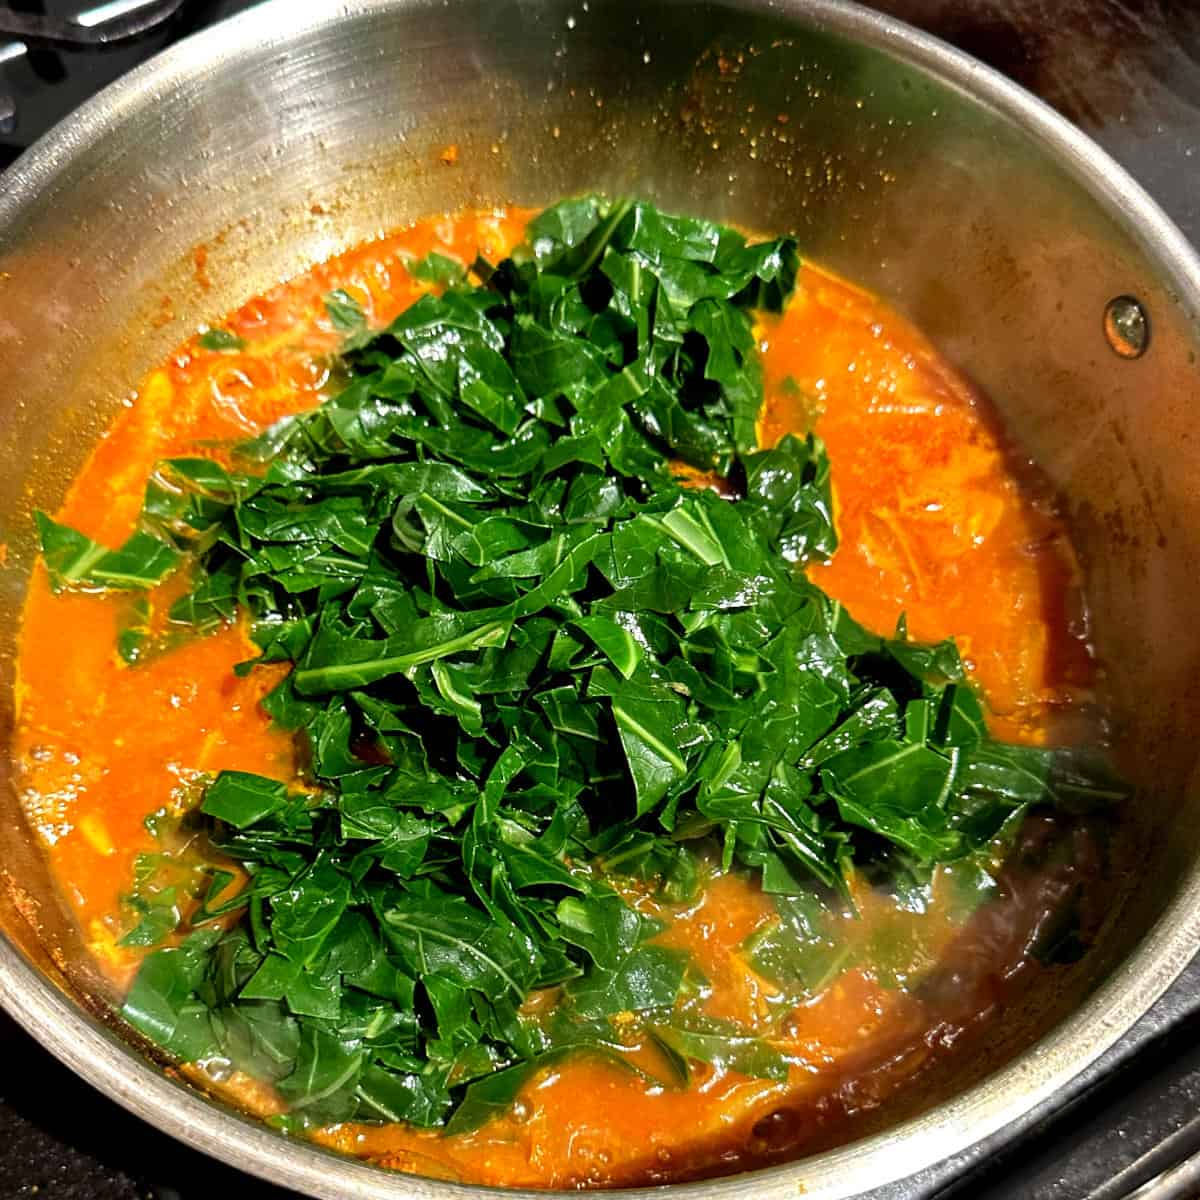 Collard greens added to pan with tomatoes, onions and spices.